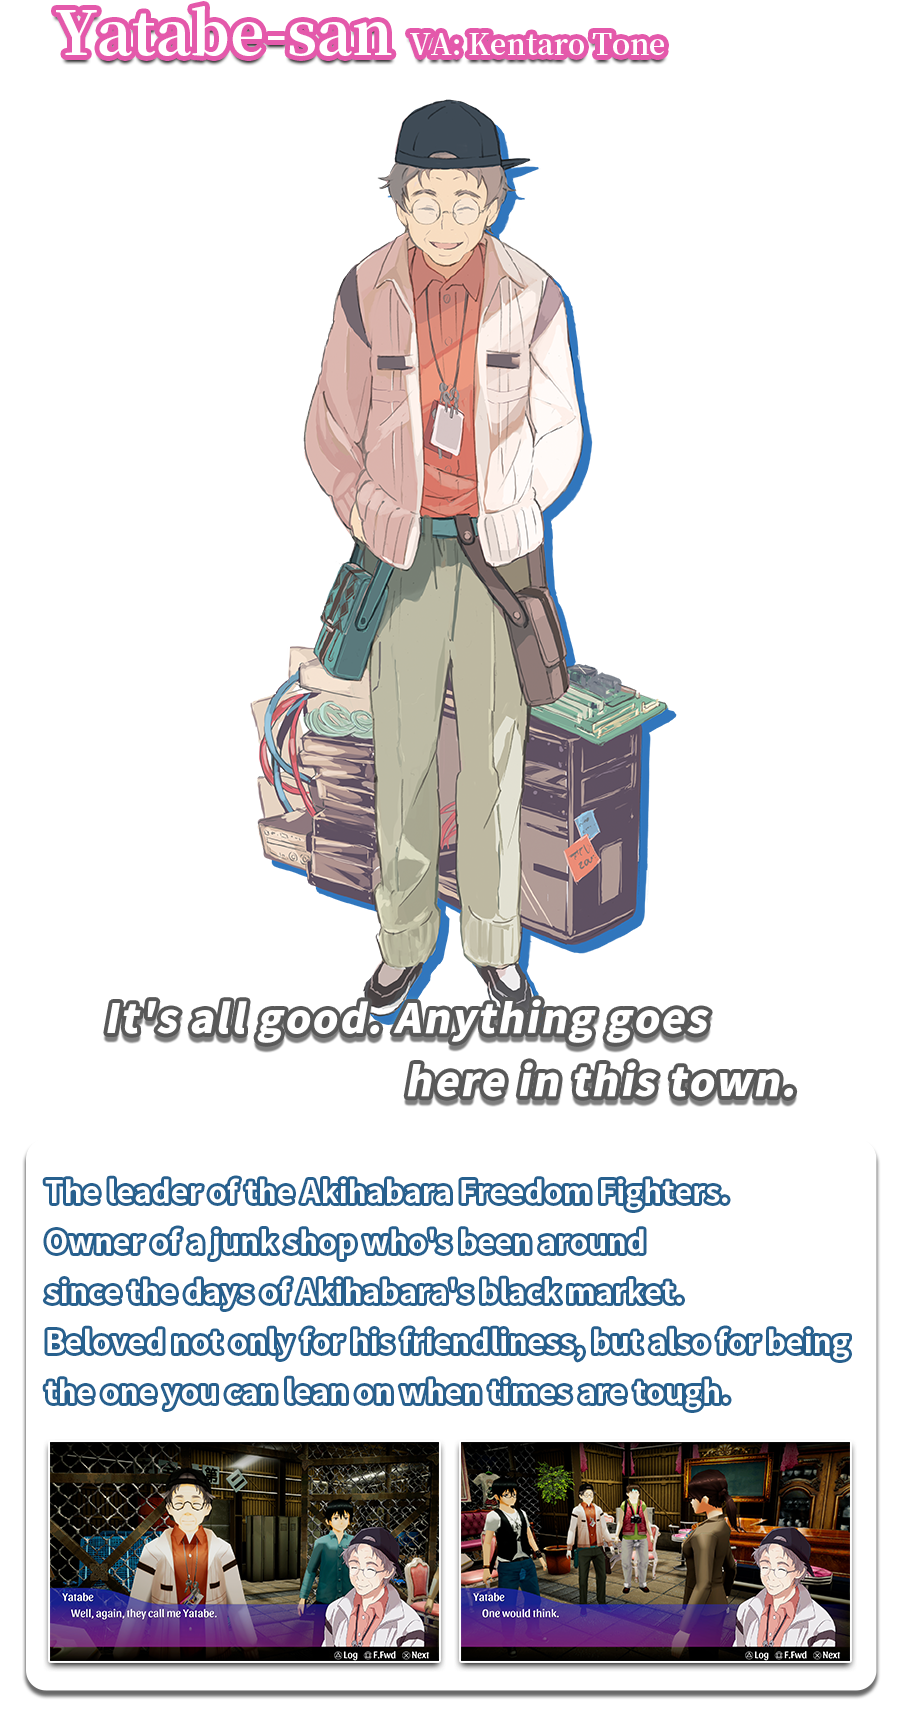 The leader of the Akihabara Freedom Fighters. Owner of a junk shop who's been around since the days of Akihabara's black market. Beloved not only for his friendliness, but also for being the one you can lean on when times are tough.